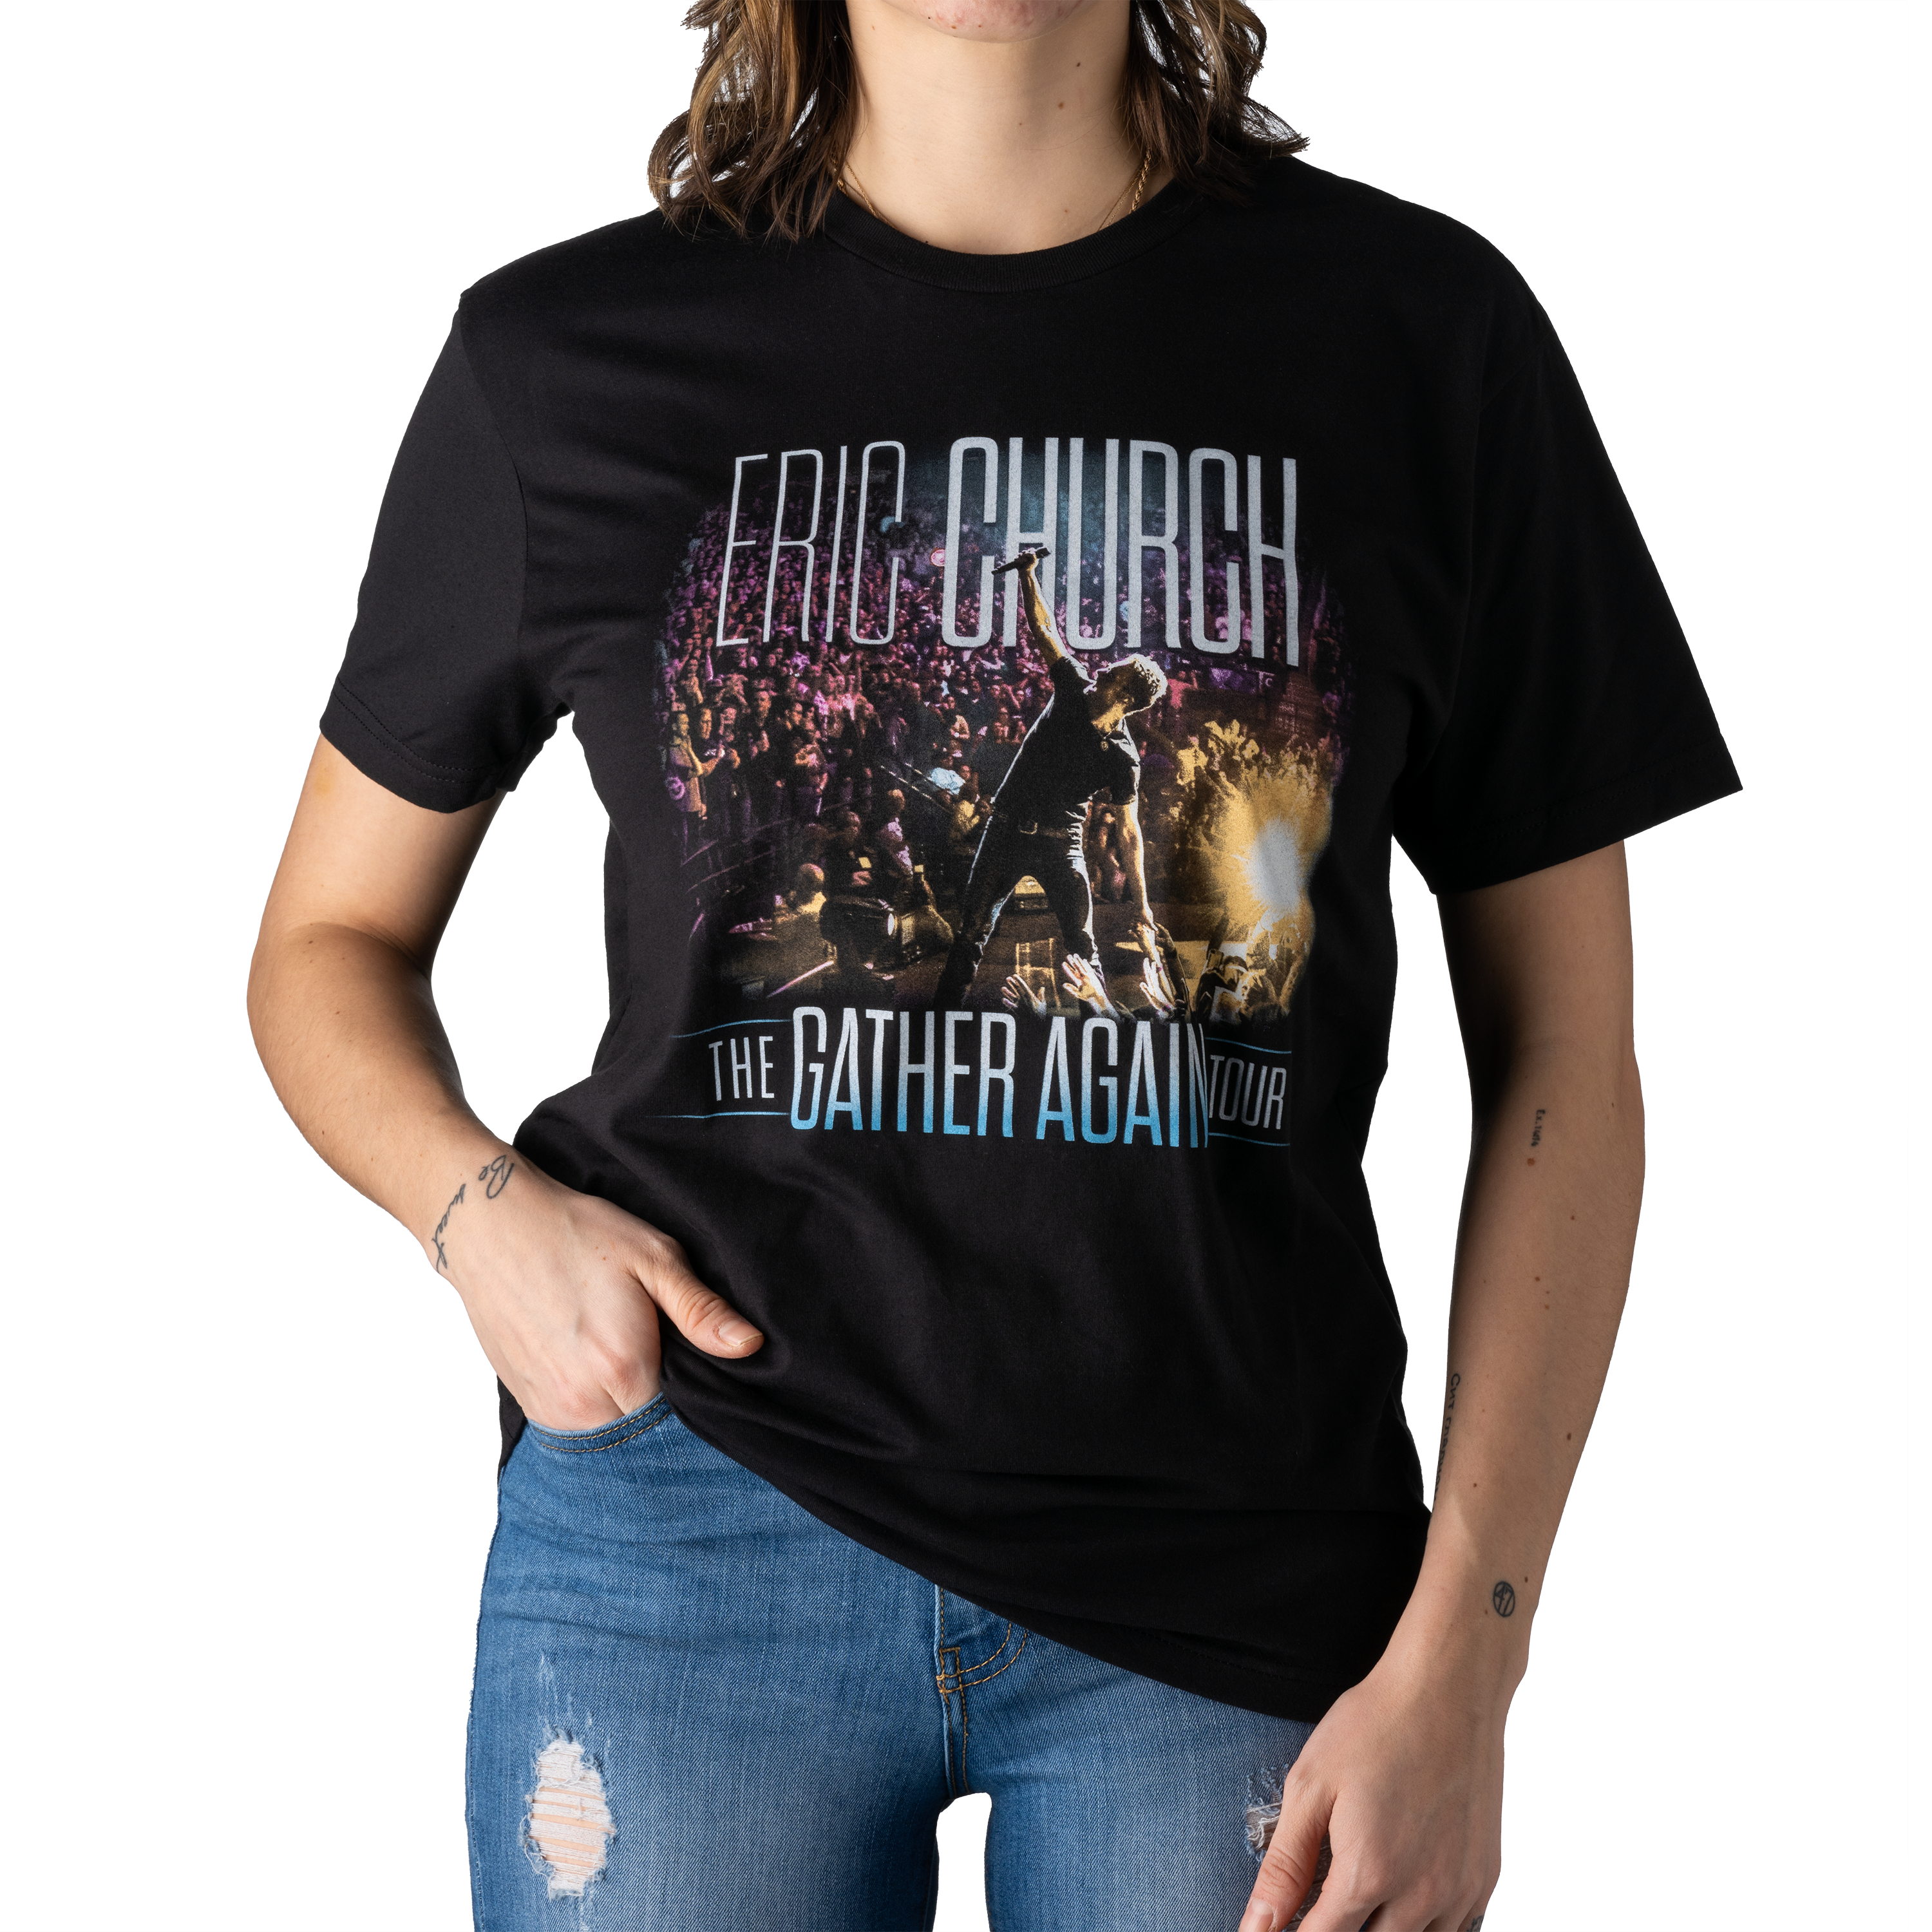 The Gather Again Tour T-Shirt - EC On Stage